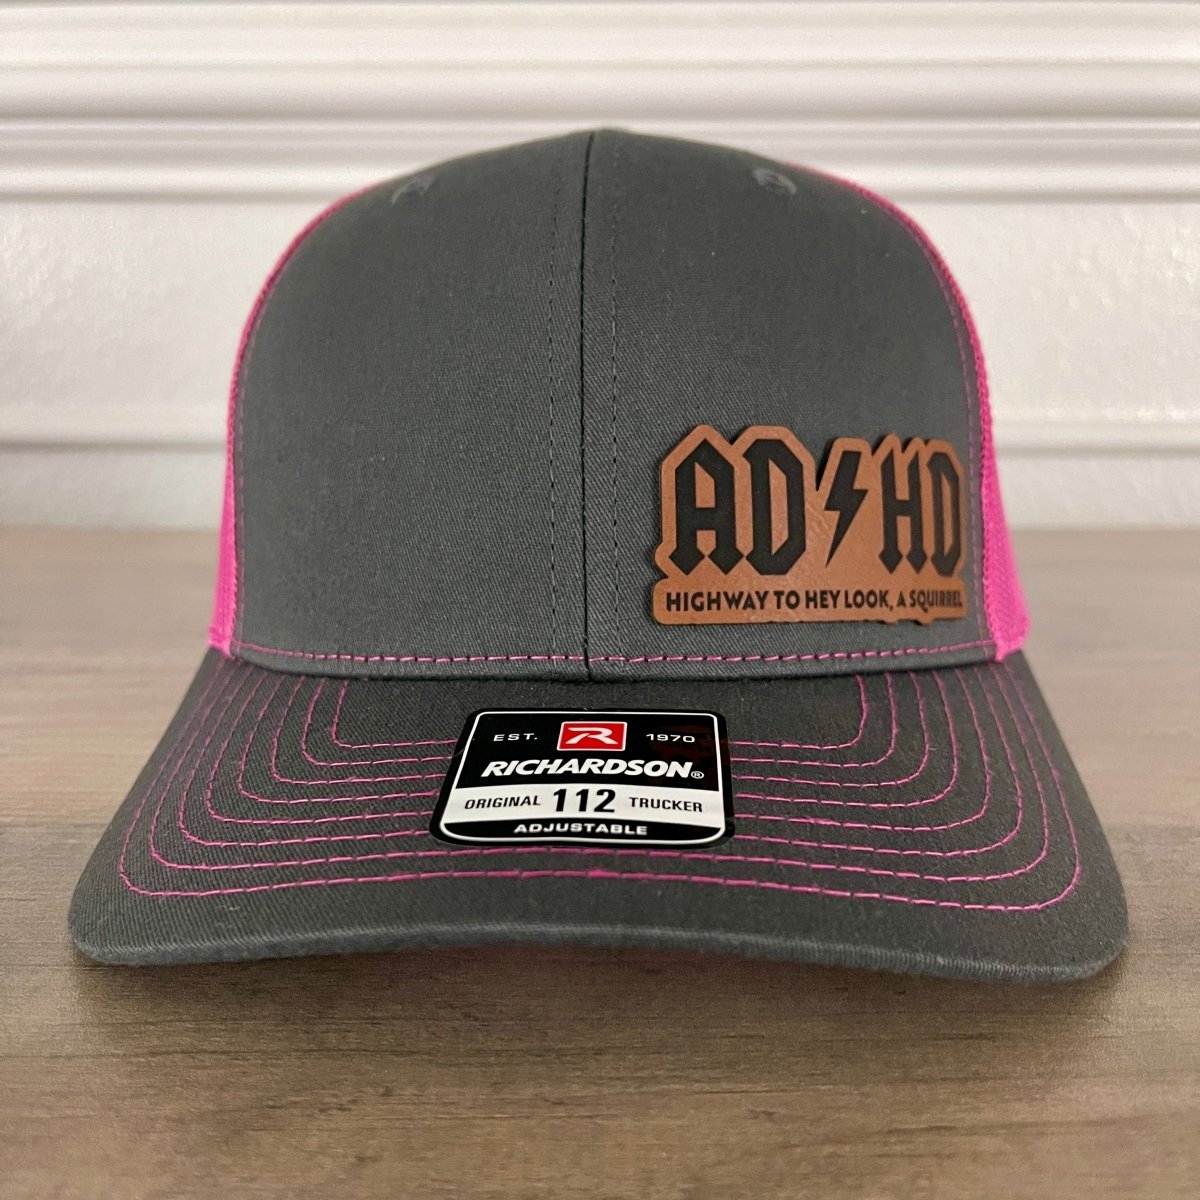 ADHD Highway To Hey Look, A Squirrel Funny Leather Patch Hat Pink Patch Hat - VividEditions